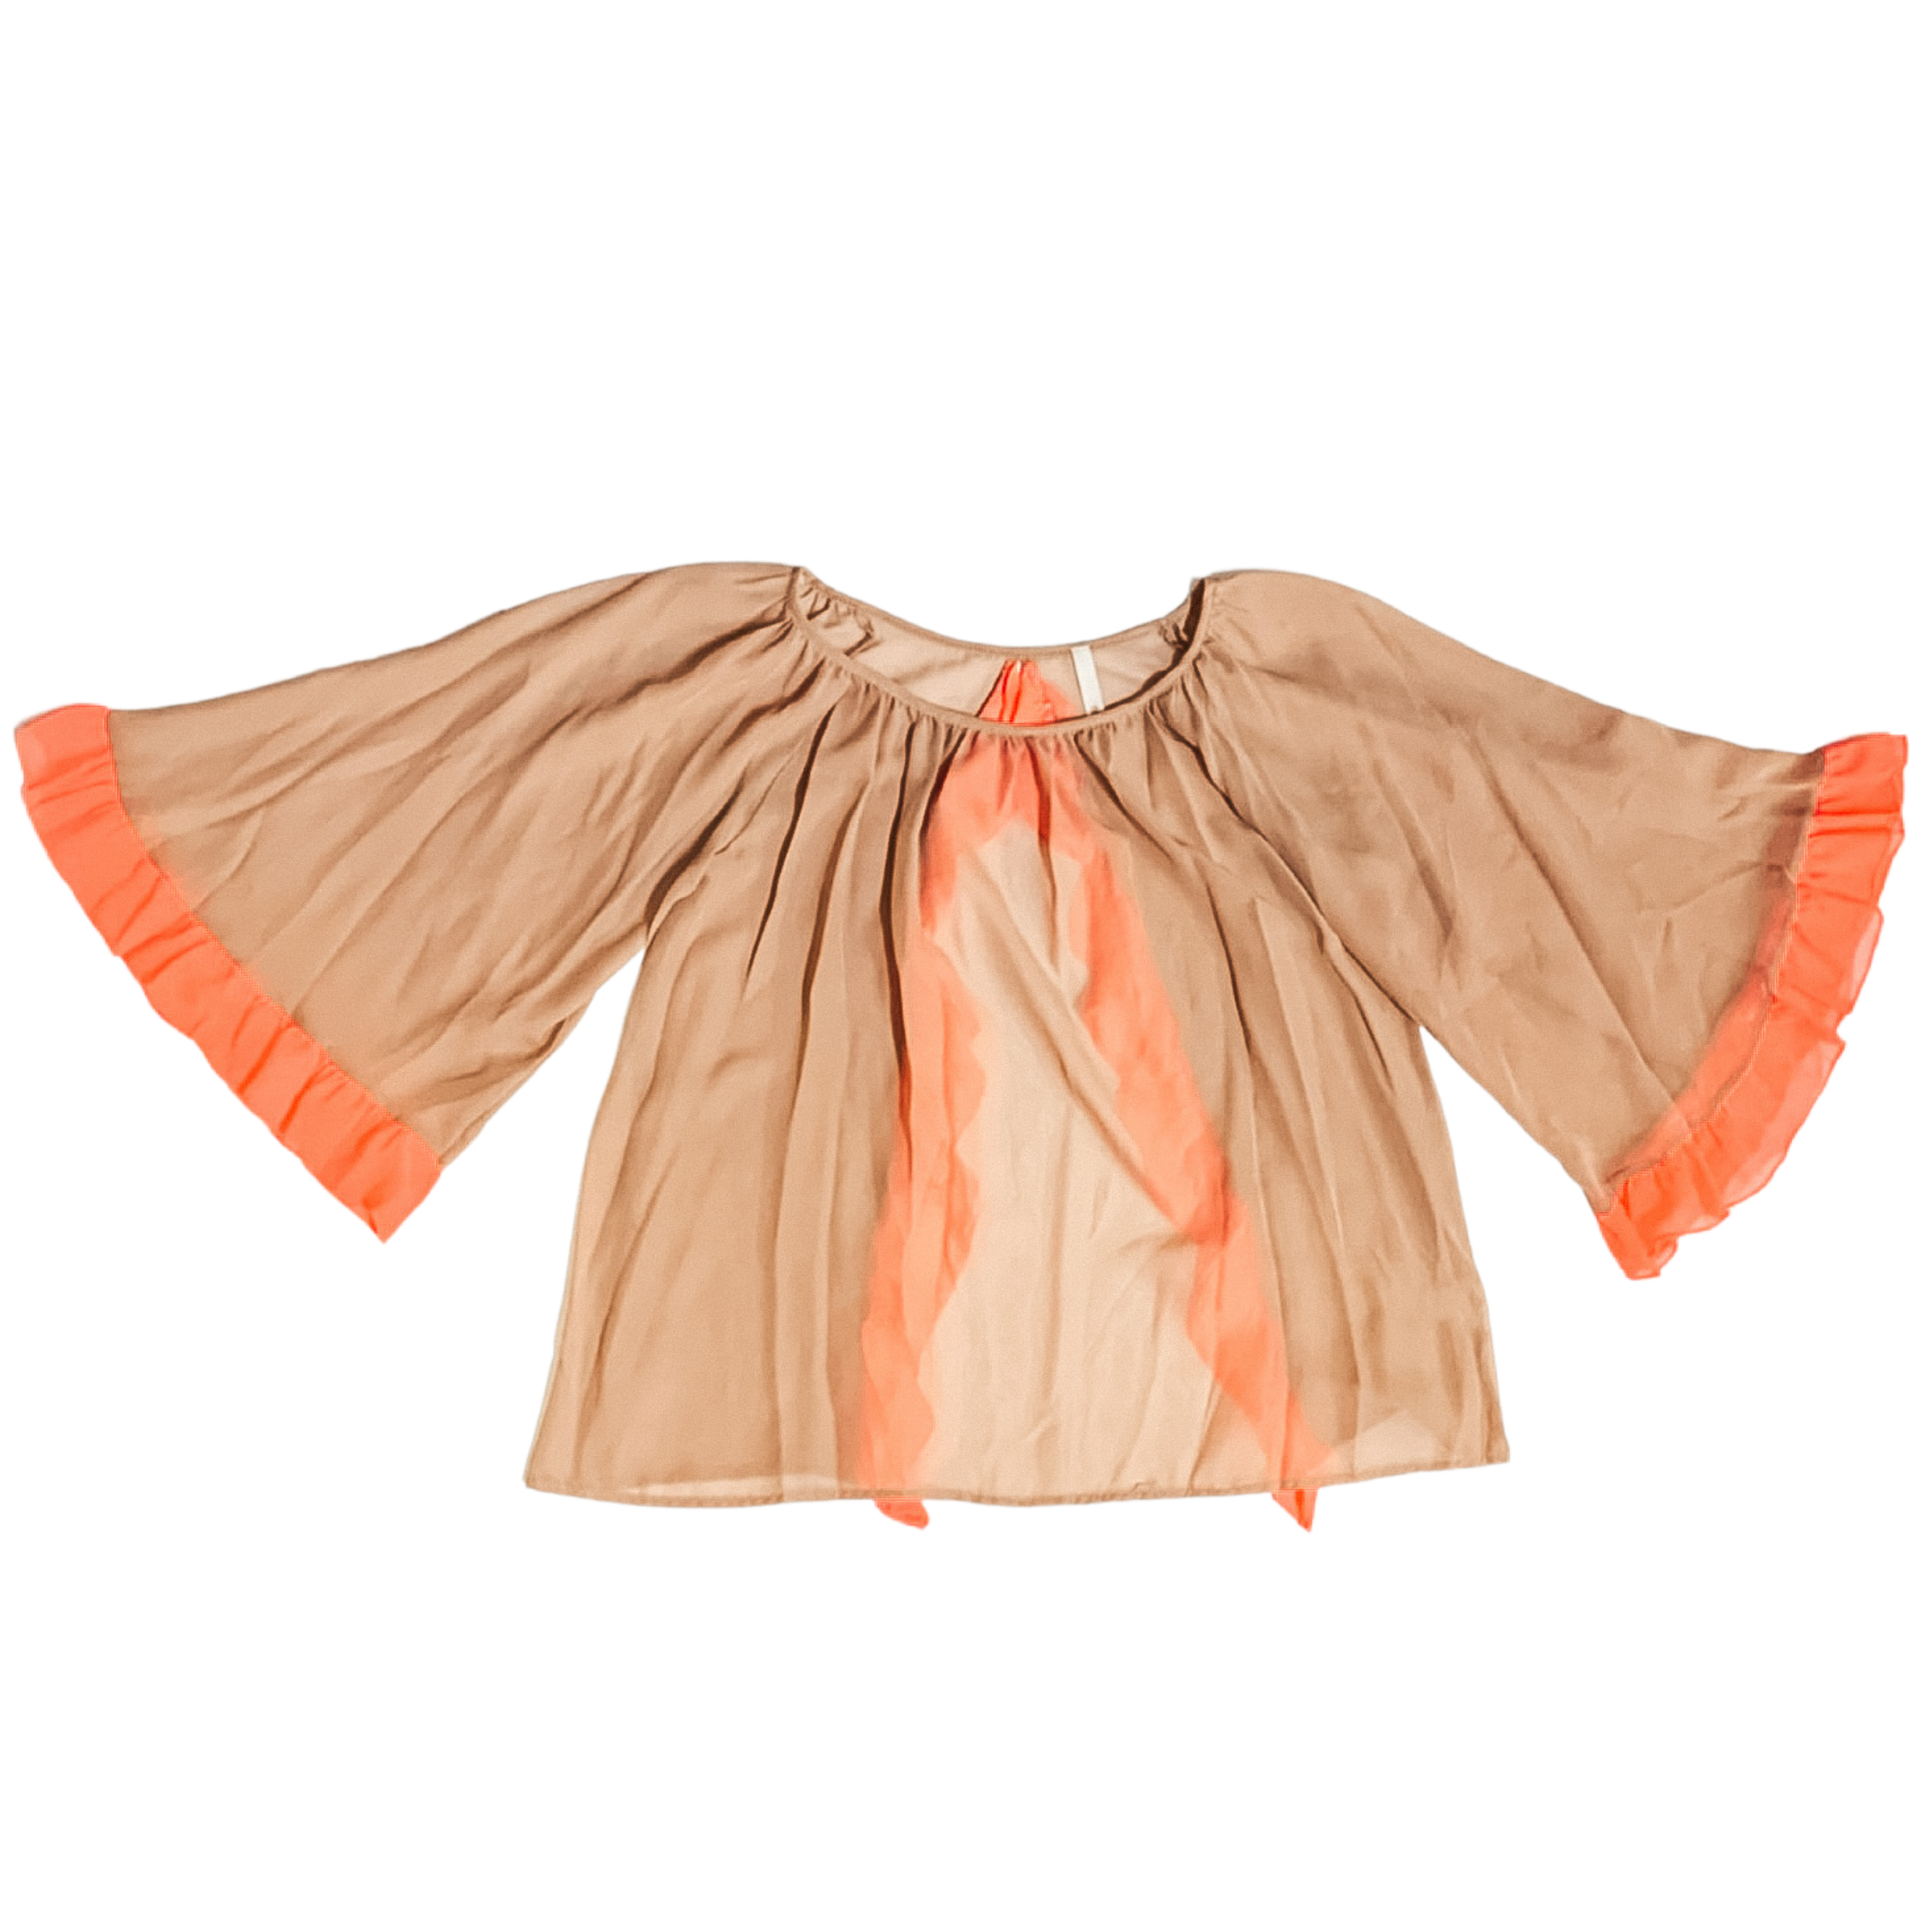 Sheer Open Back Blouse with Orange Ruffle Hemlines in Tan - Giddy Up Glamour Boutique